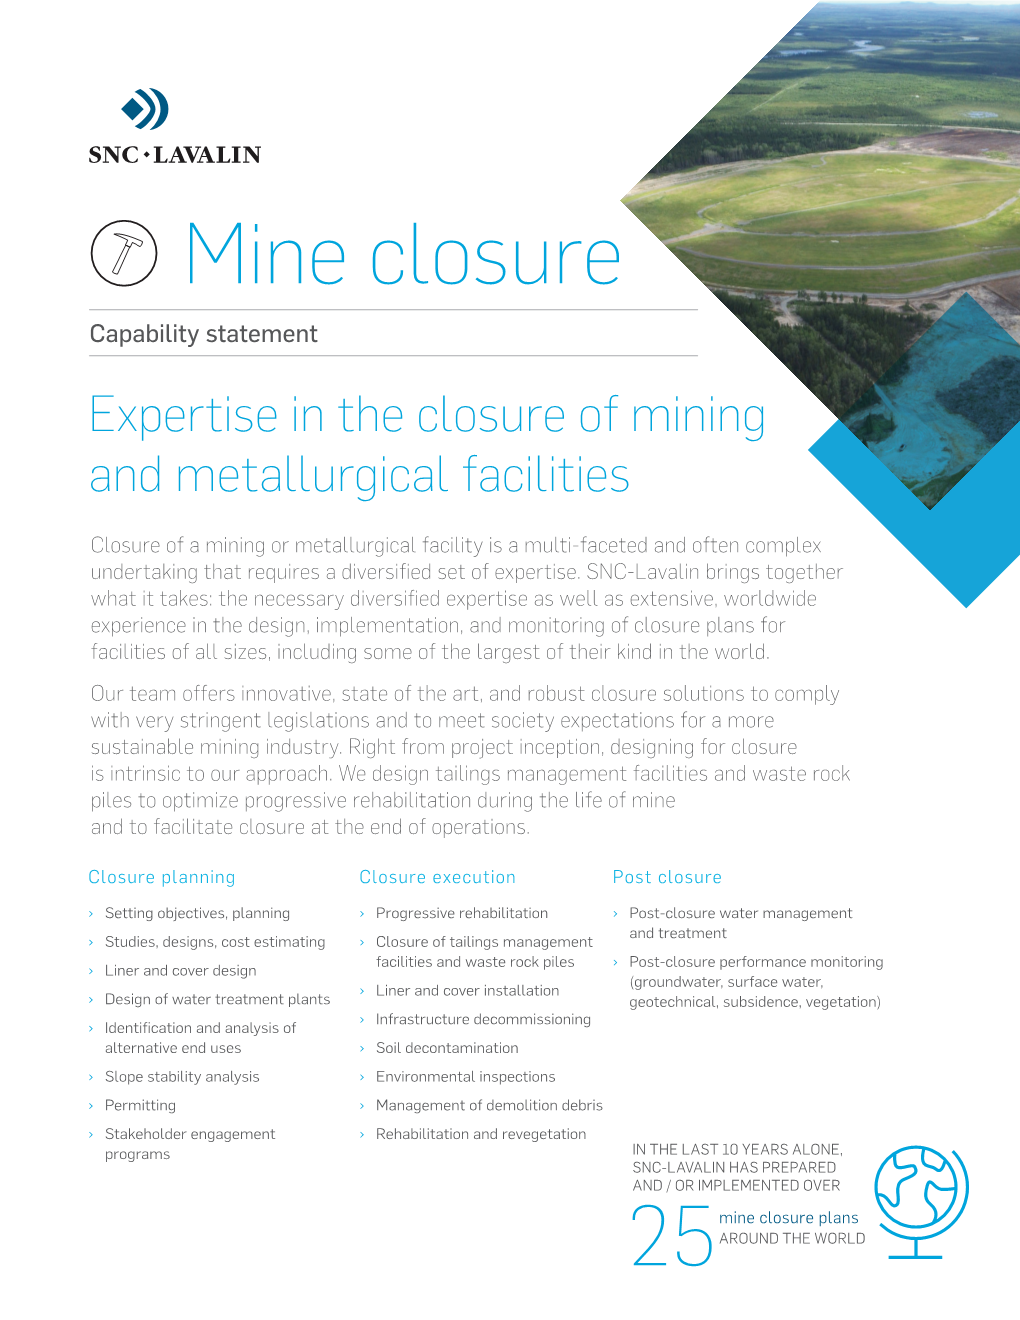 Expertise in the Closure of Mining and Metallurgical Facilities